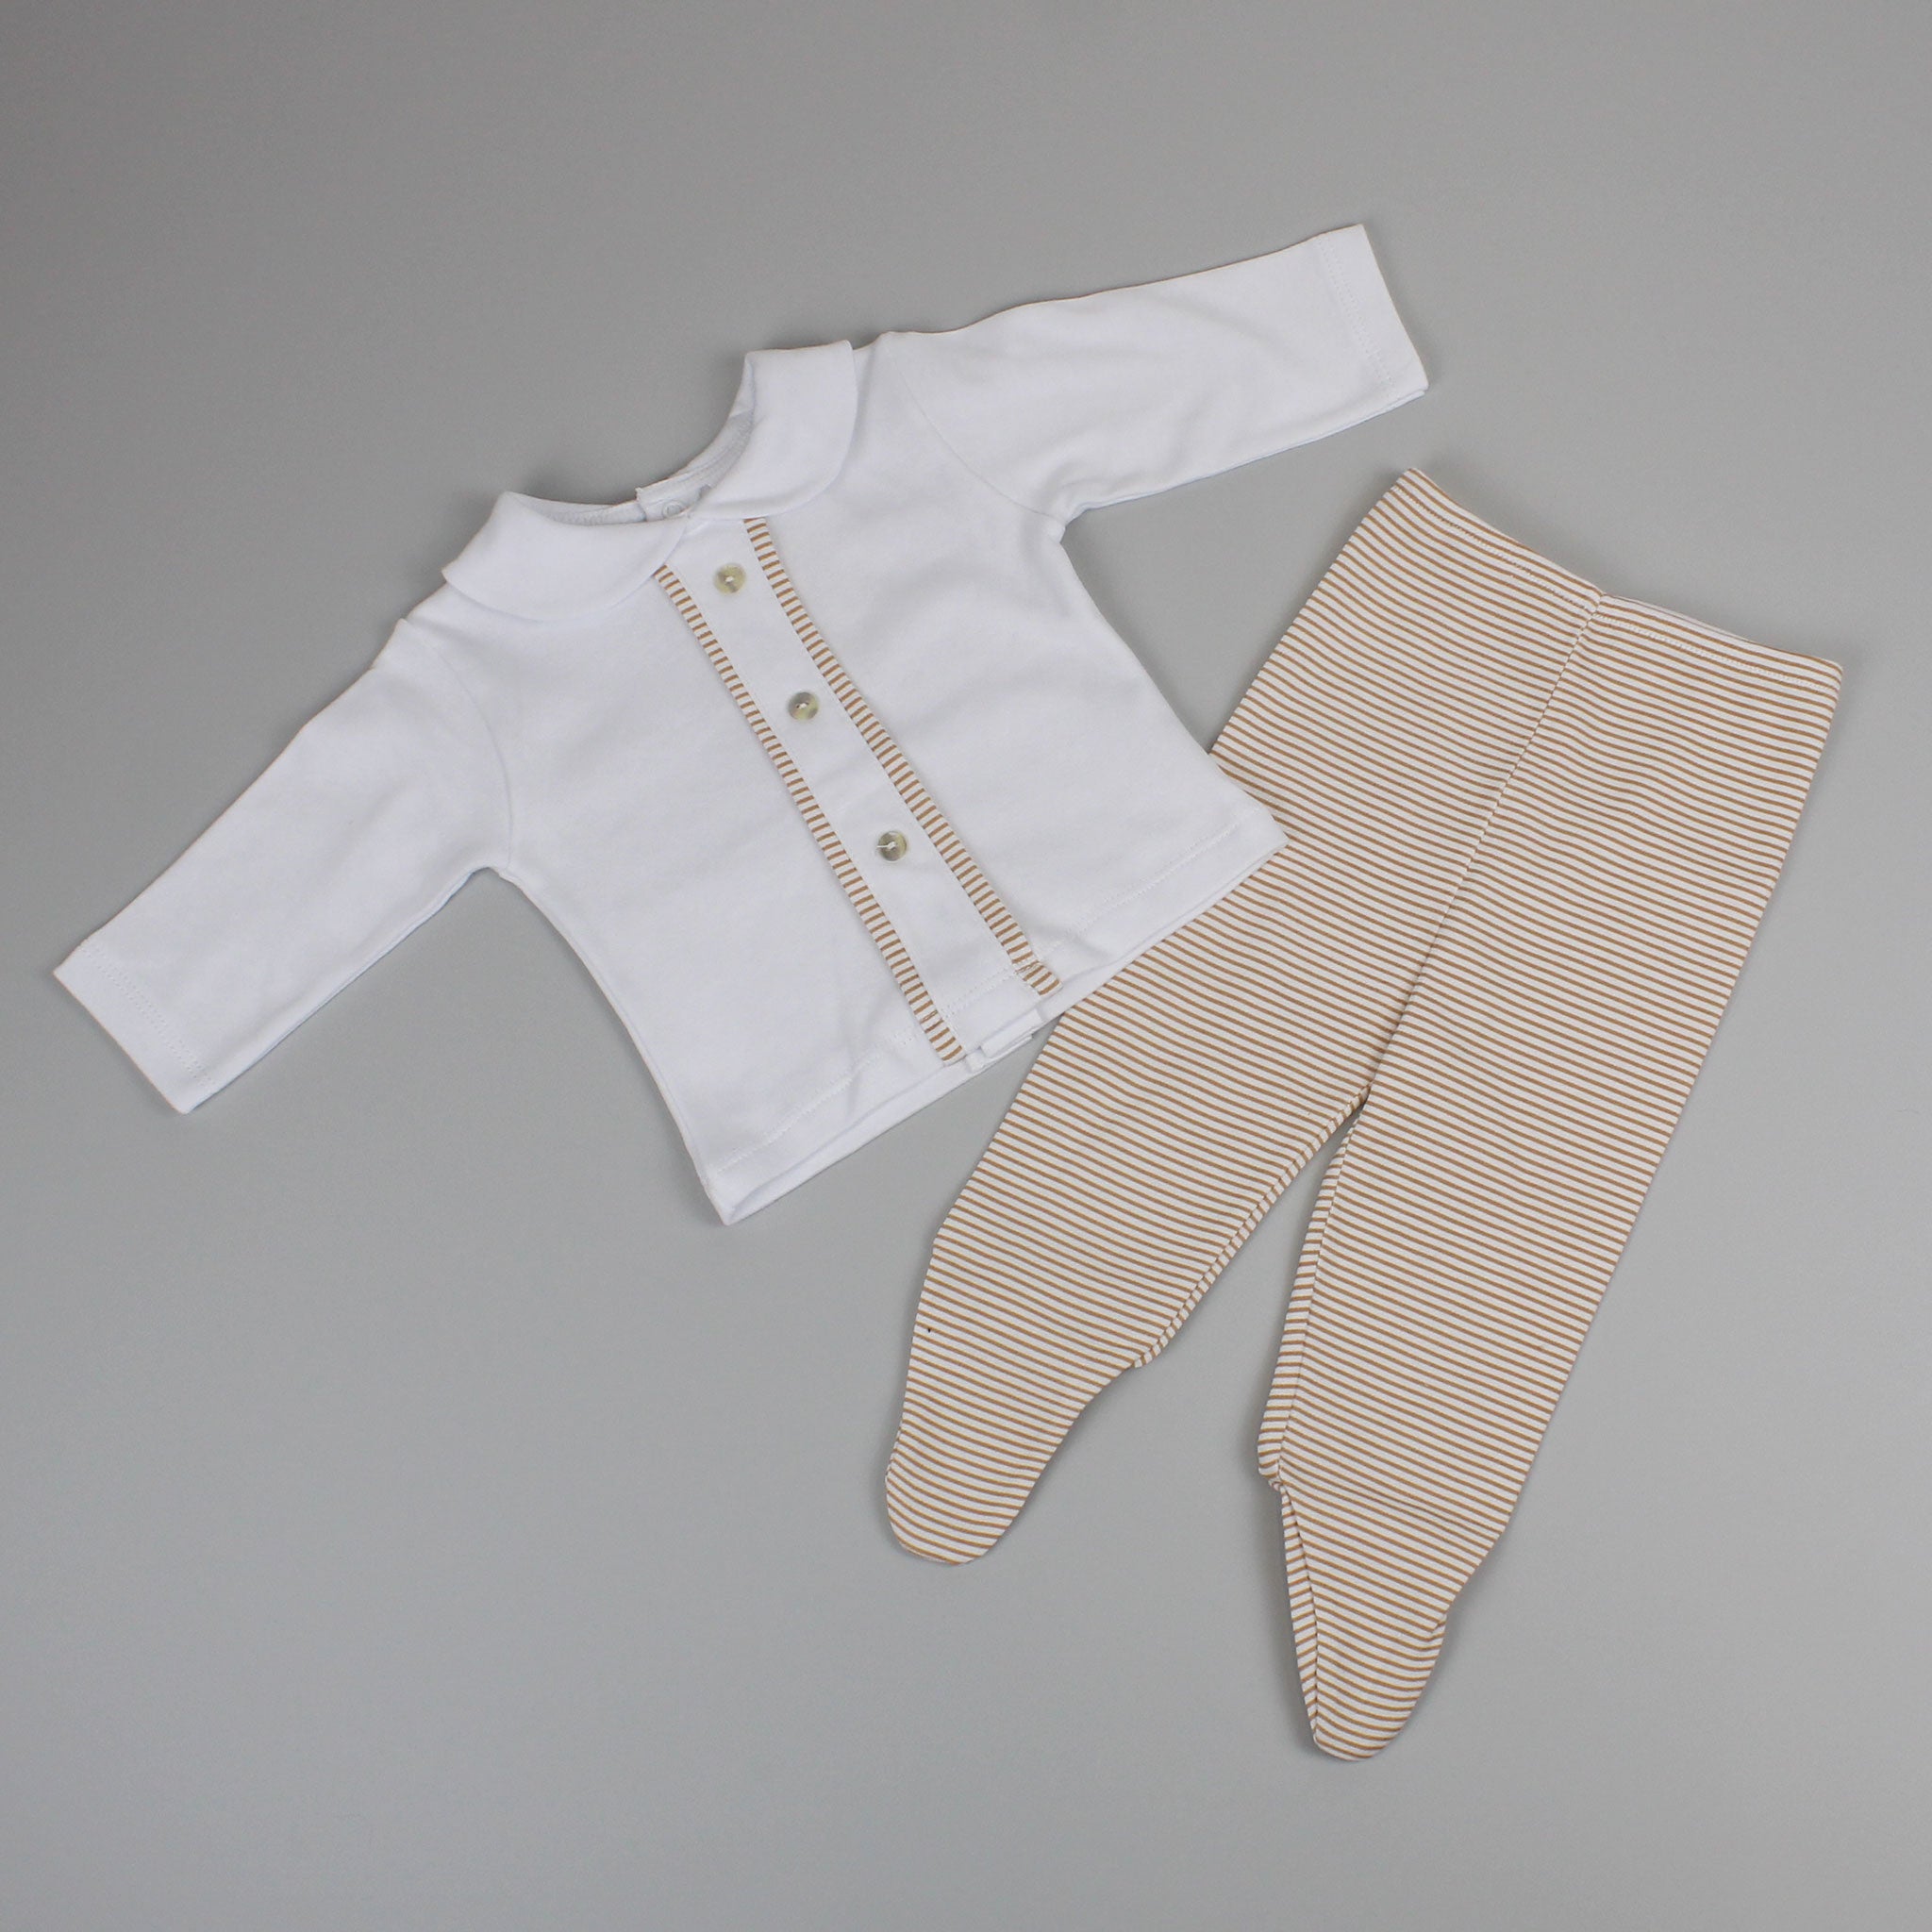 Baby Boys Beige 2 Piece Cotton Outfit - Top and Bottoms